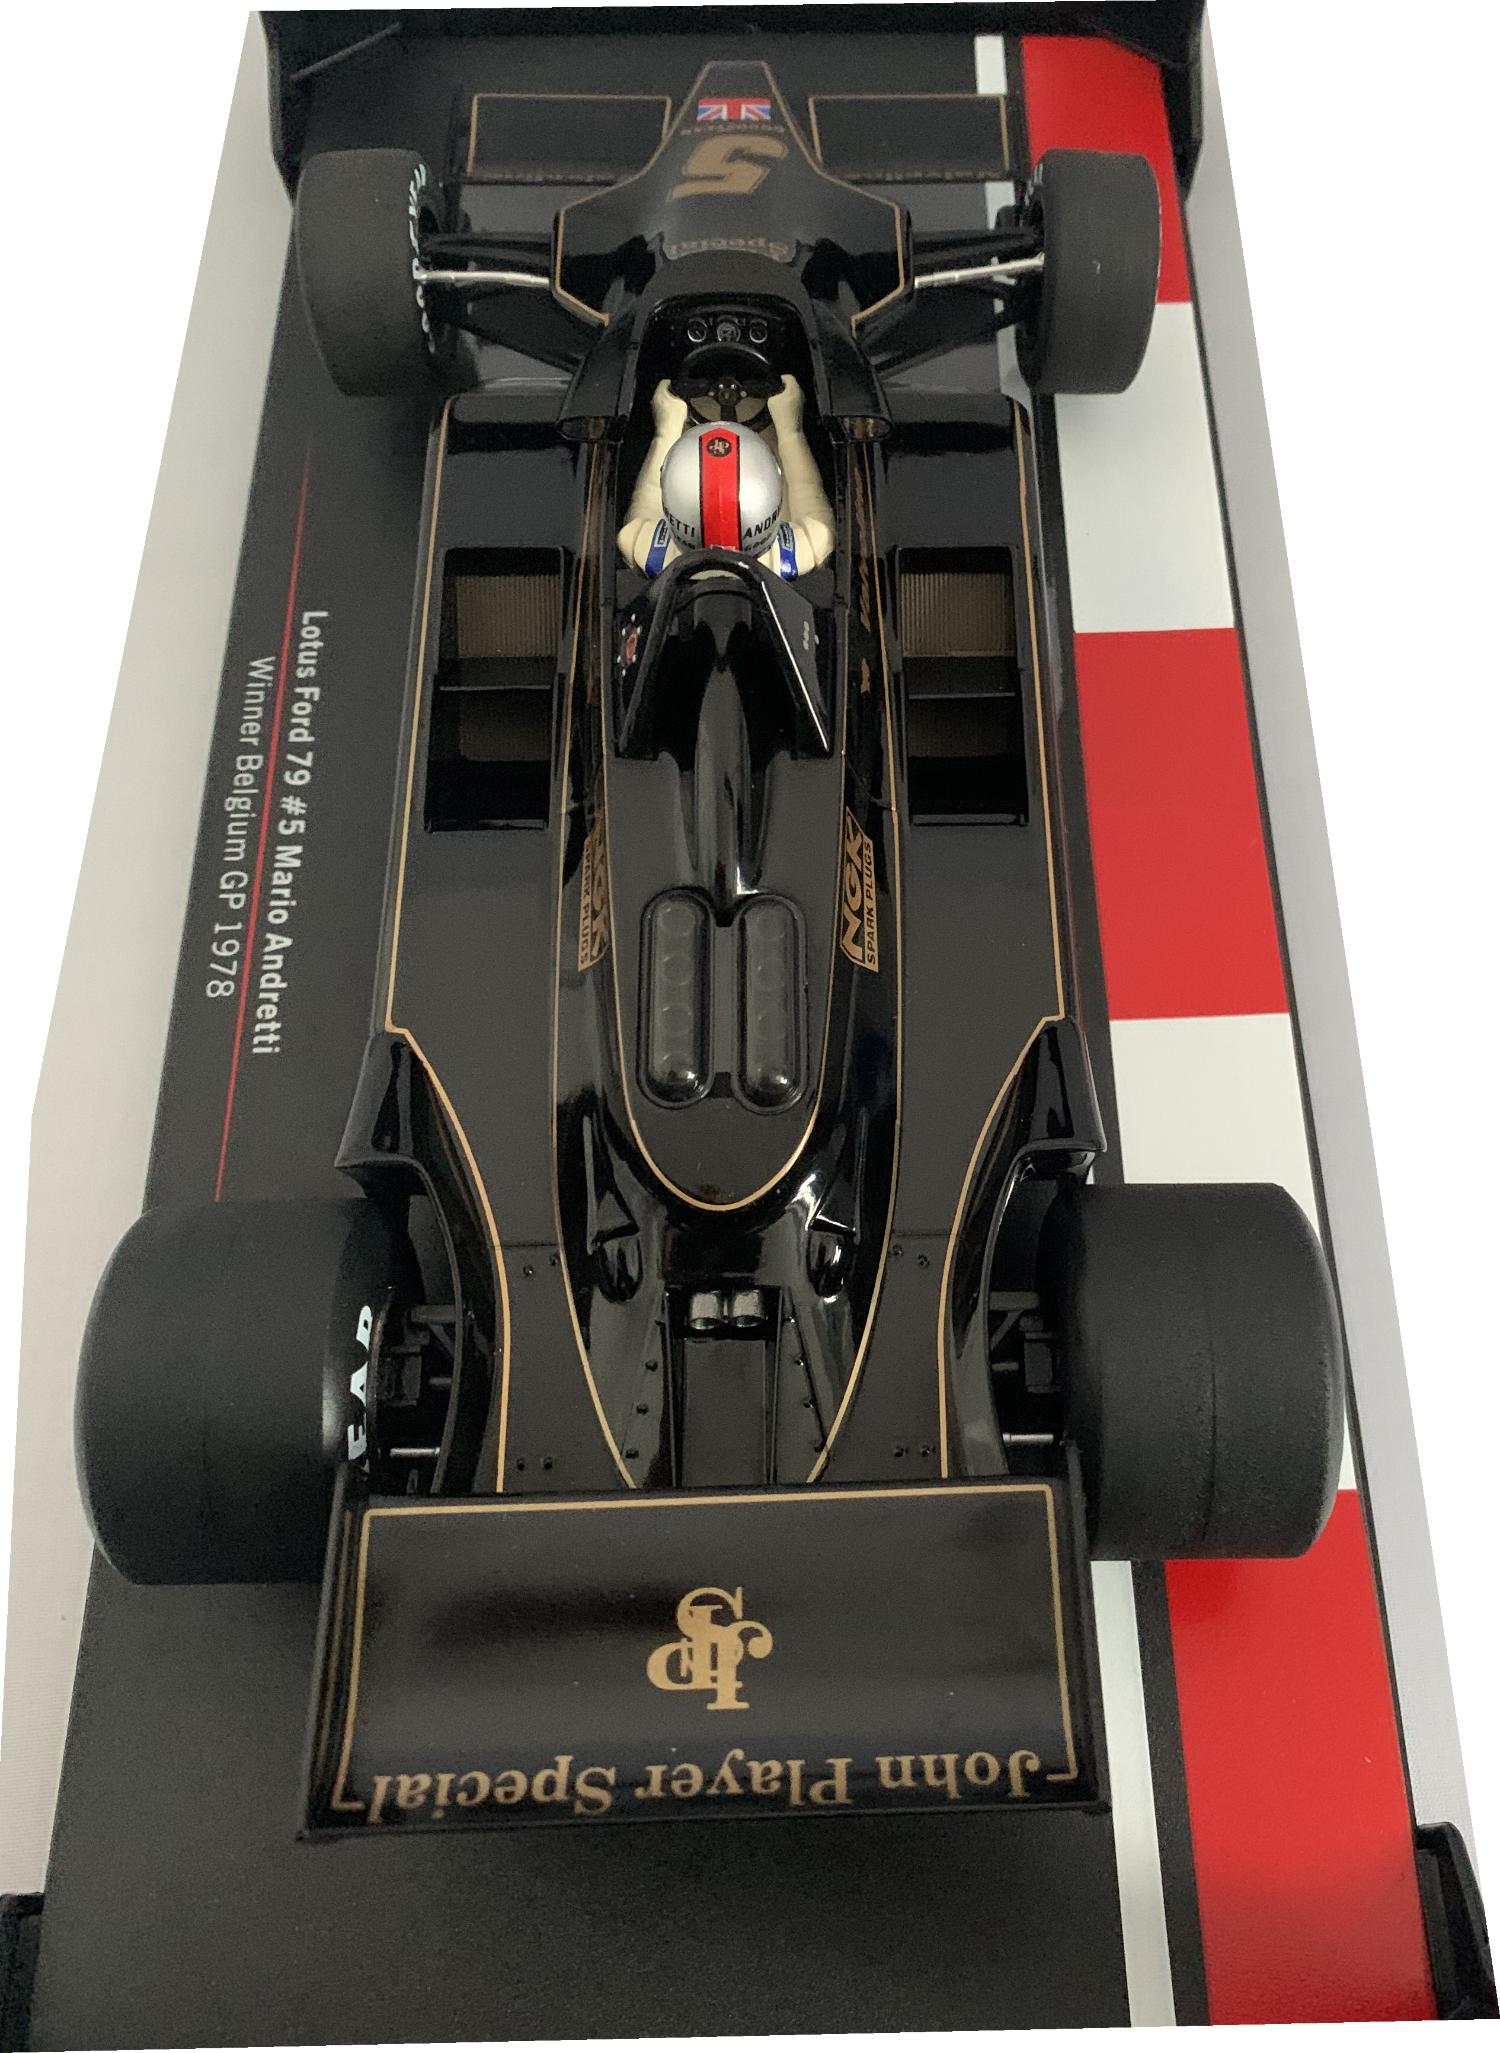 An excellent scale model of the Lotus Ford 79 with high level of detail throughout, all authentically recreated. Model is presented on a removable plinth and presented in a window display box.     The car is approx. 24.5 cm long and the presentation box is 31 cm long